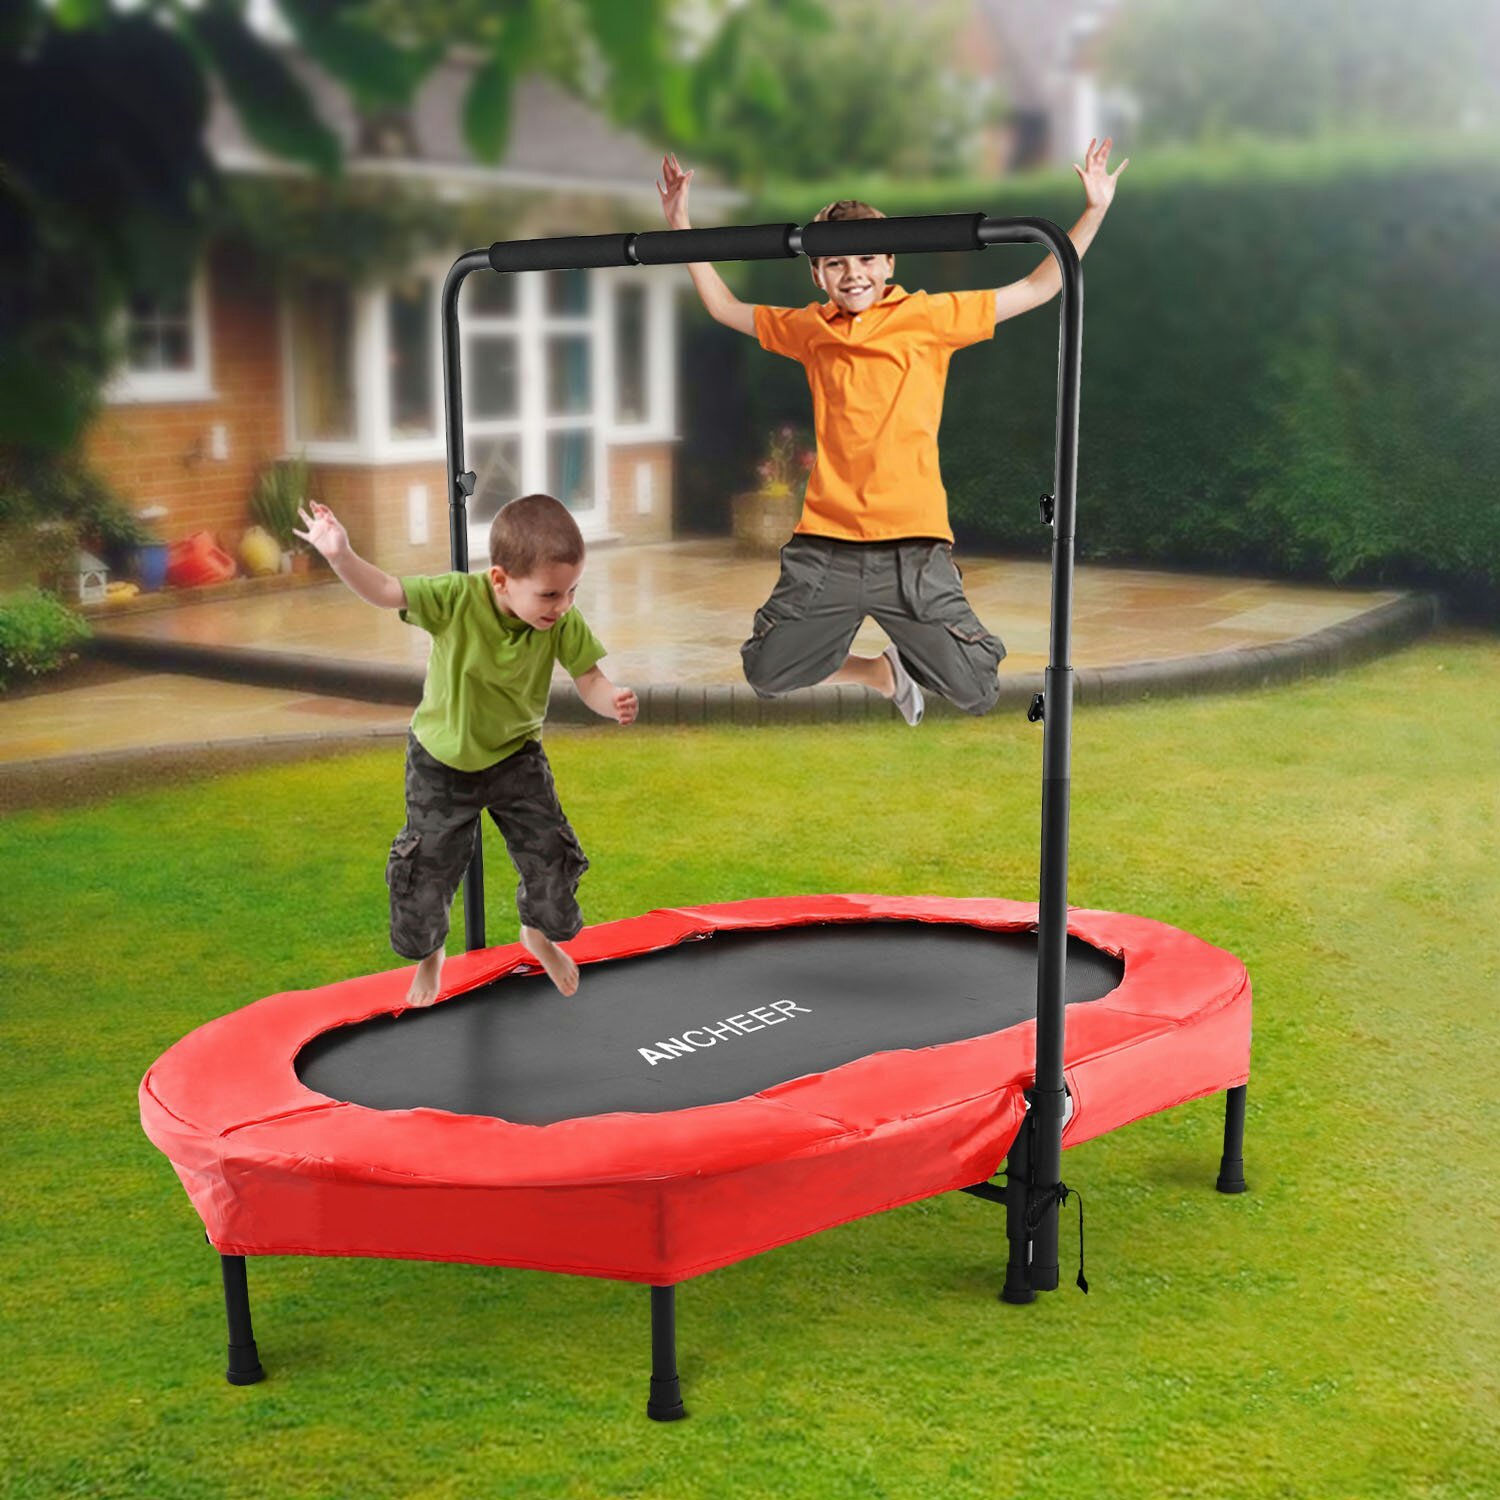 ANCHEER Foldable 40 Mini Trampoline Rebounder Max Load 300lbs Rebounder Trampoline Exercise Trampoline with Adjustable Handrail for Indoor/Garden/Workout Cardio 